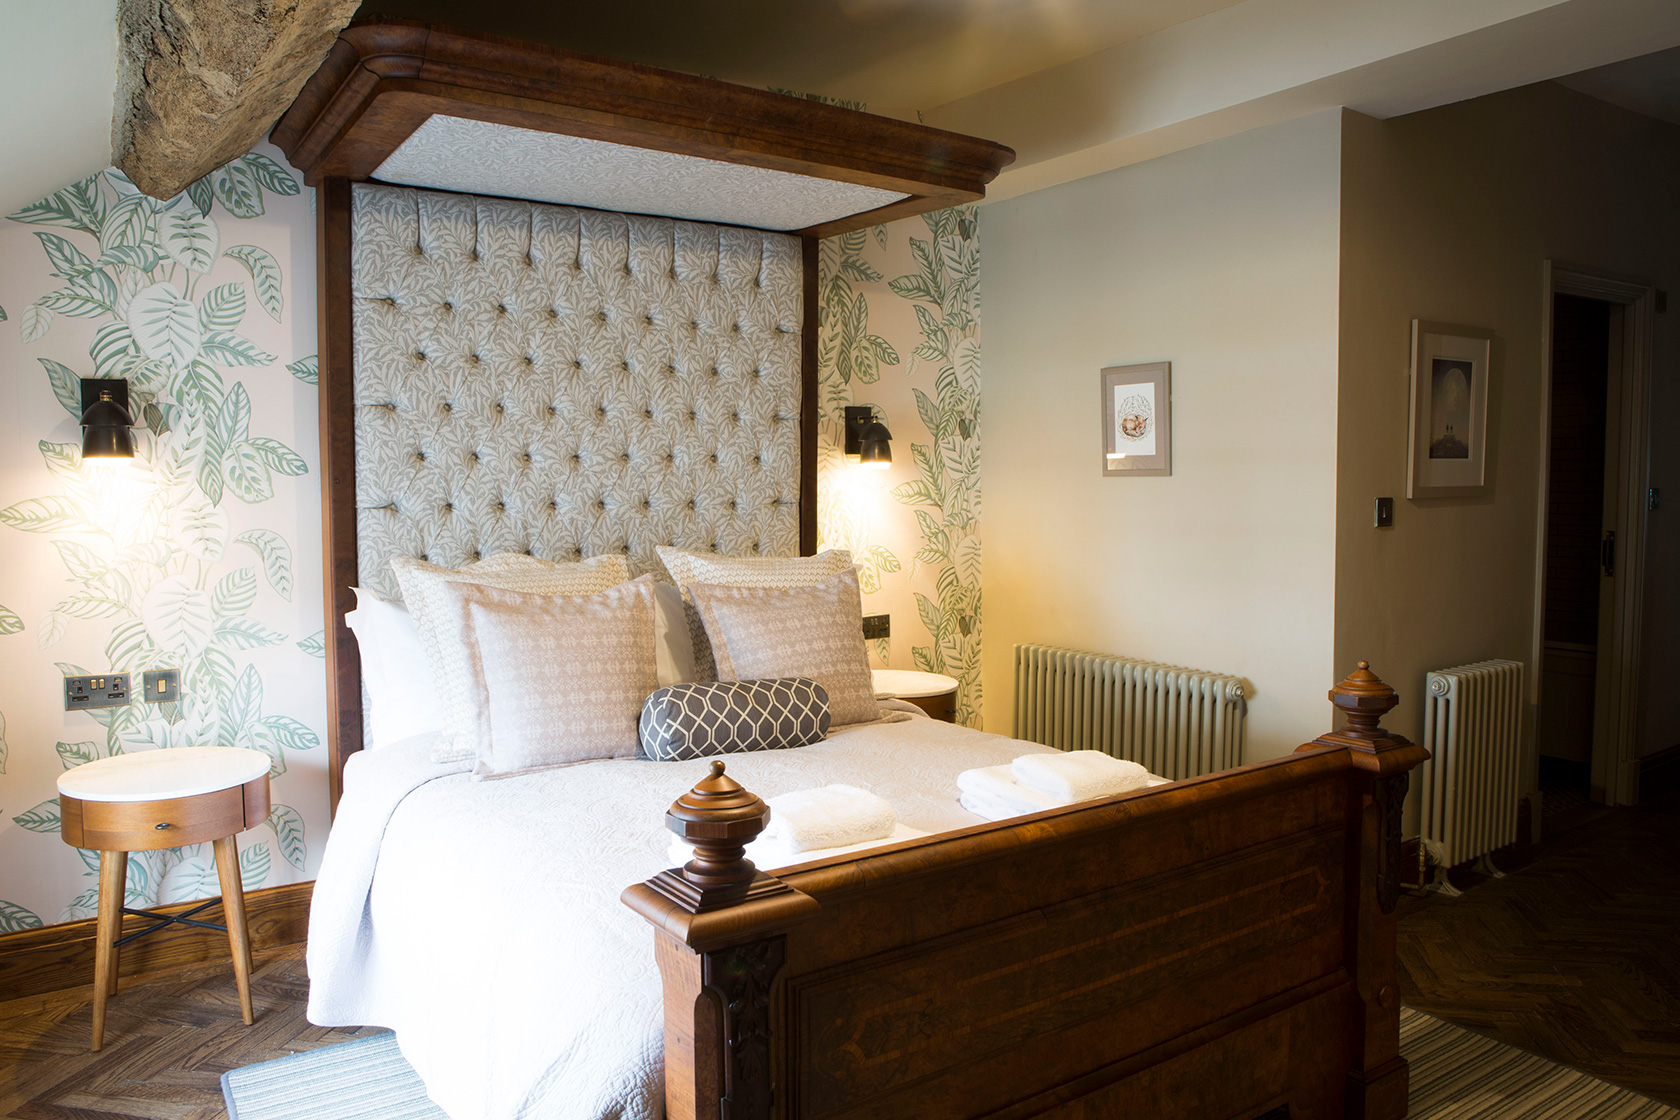 A premium hotel bedroom at the Legh Arms close to Alderley Edge